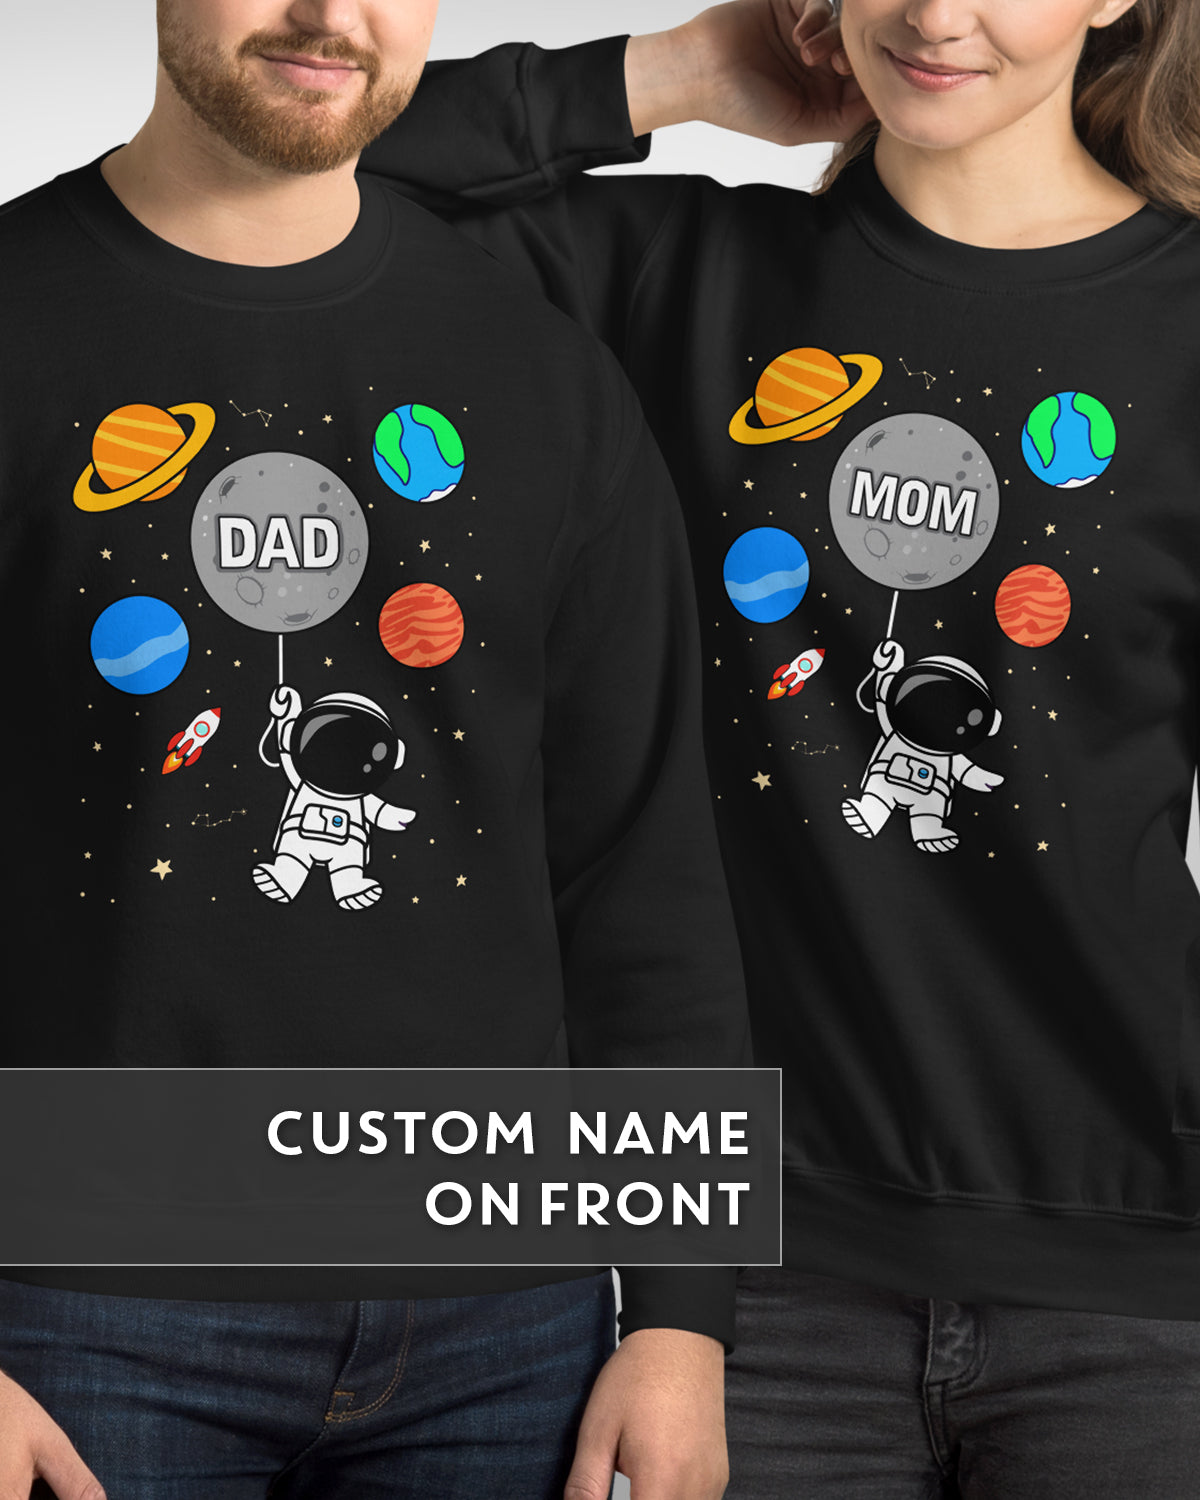 Space-Themed Birthday Sweater, Custom Family Set for Astronaut Party, Mom & Dad of Birthday Boy Sweatshirts, Astronomy & Rocket Gifts